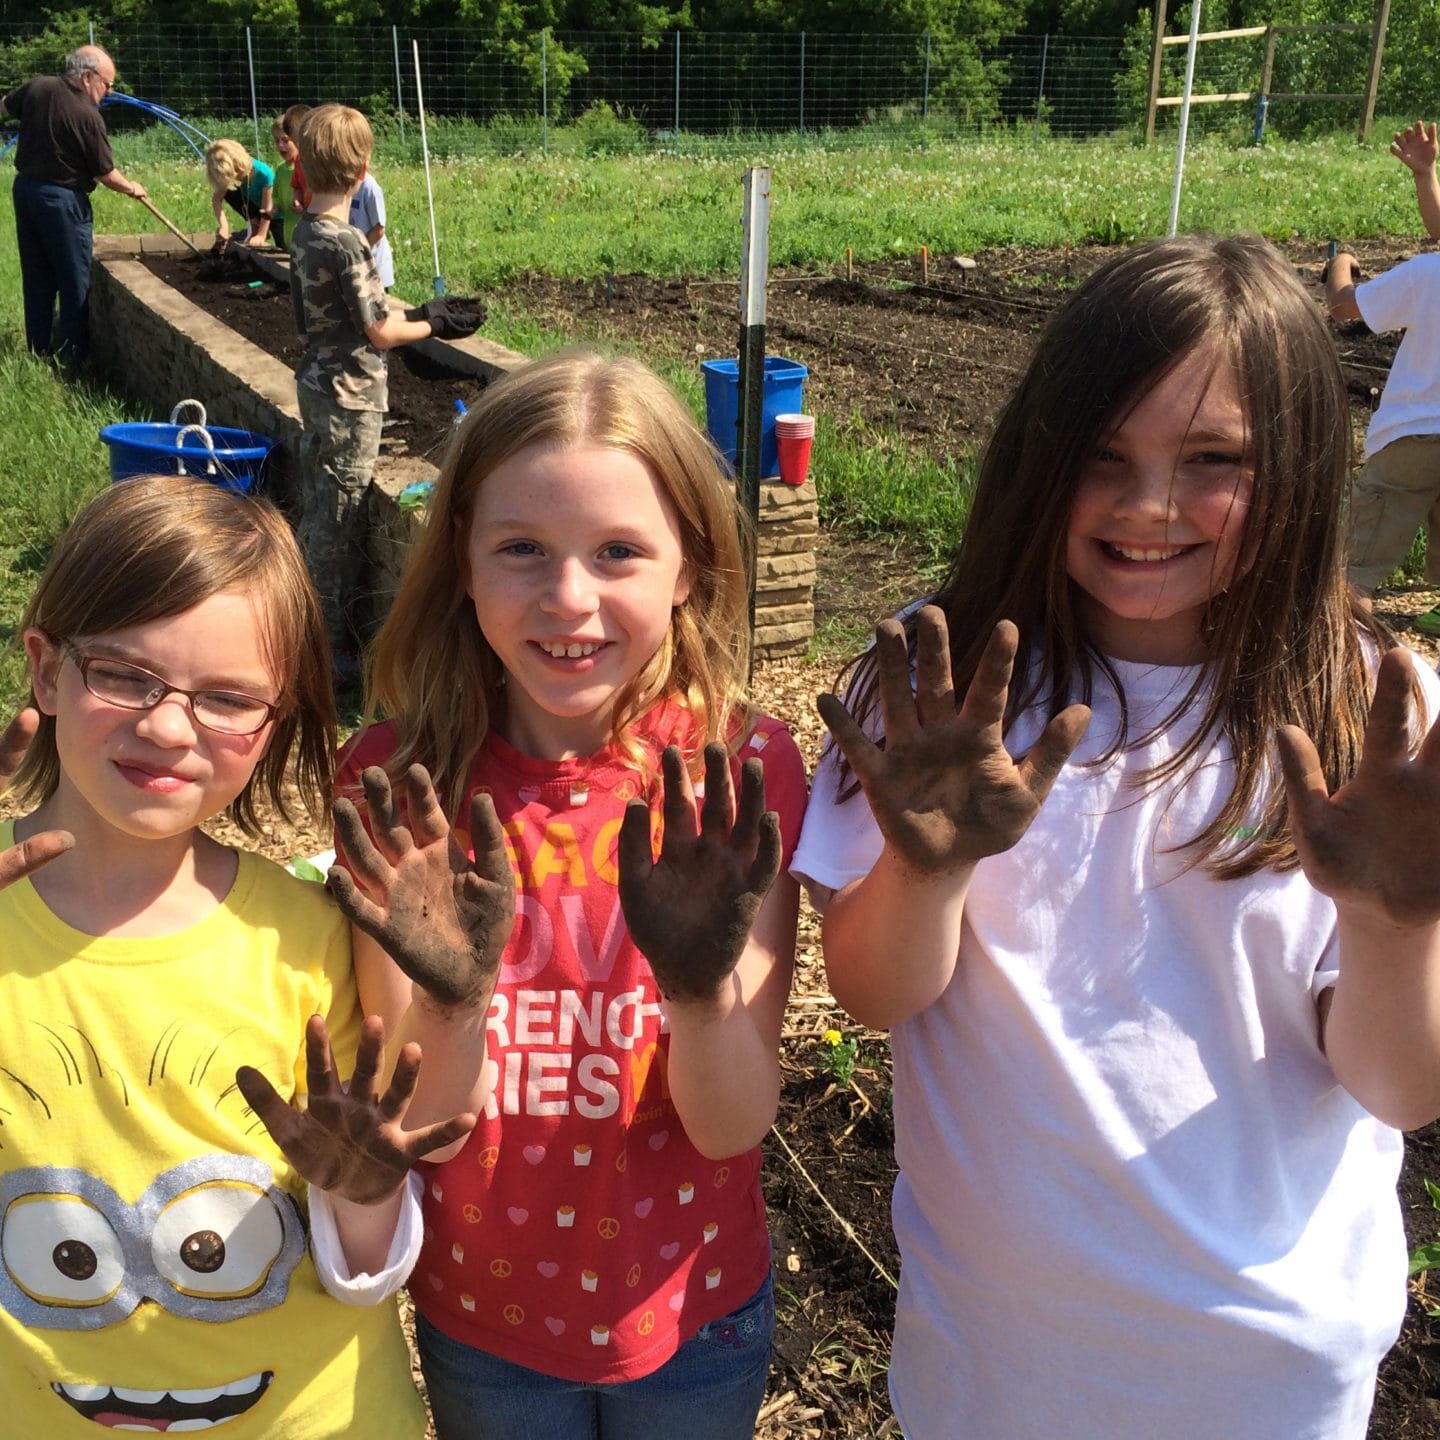 Young girls showing muddy hands from gardening